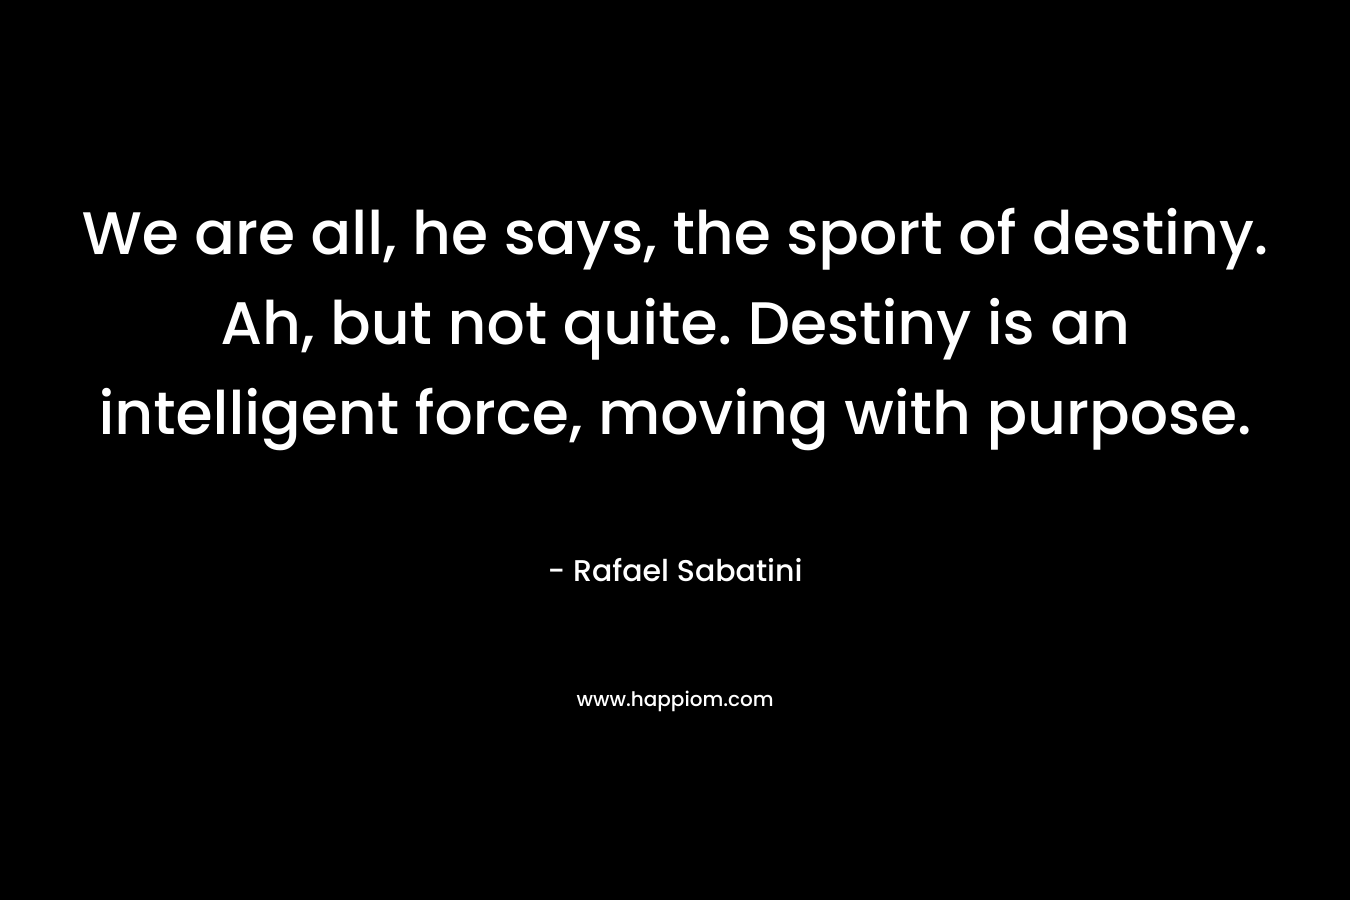 We are all, he says, the sport of destiny. Ah, but not quite. Destiny is an intelligent force, moving with purpose.